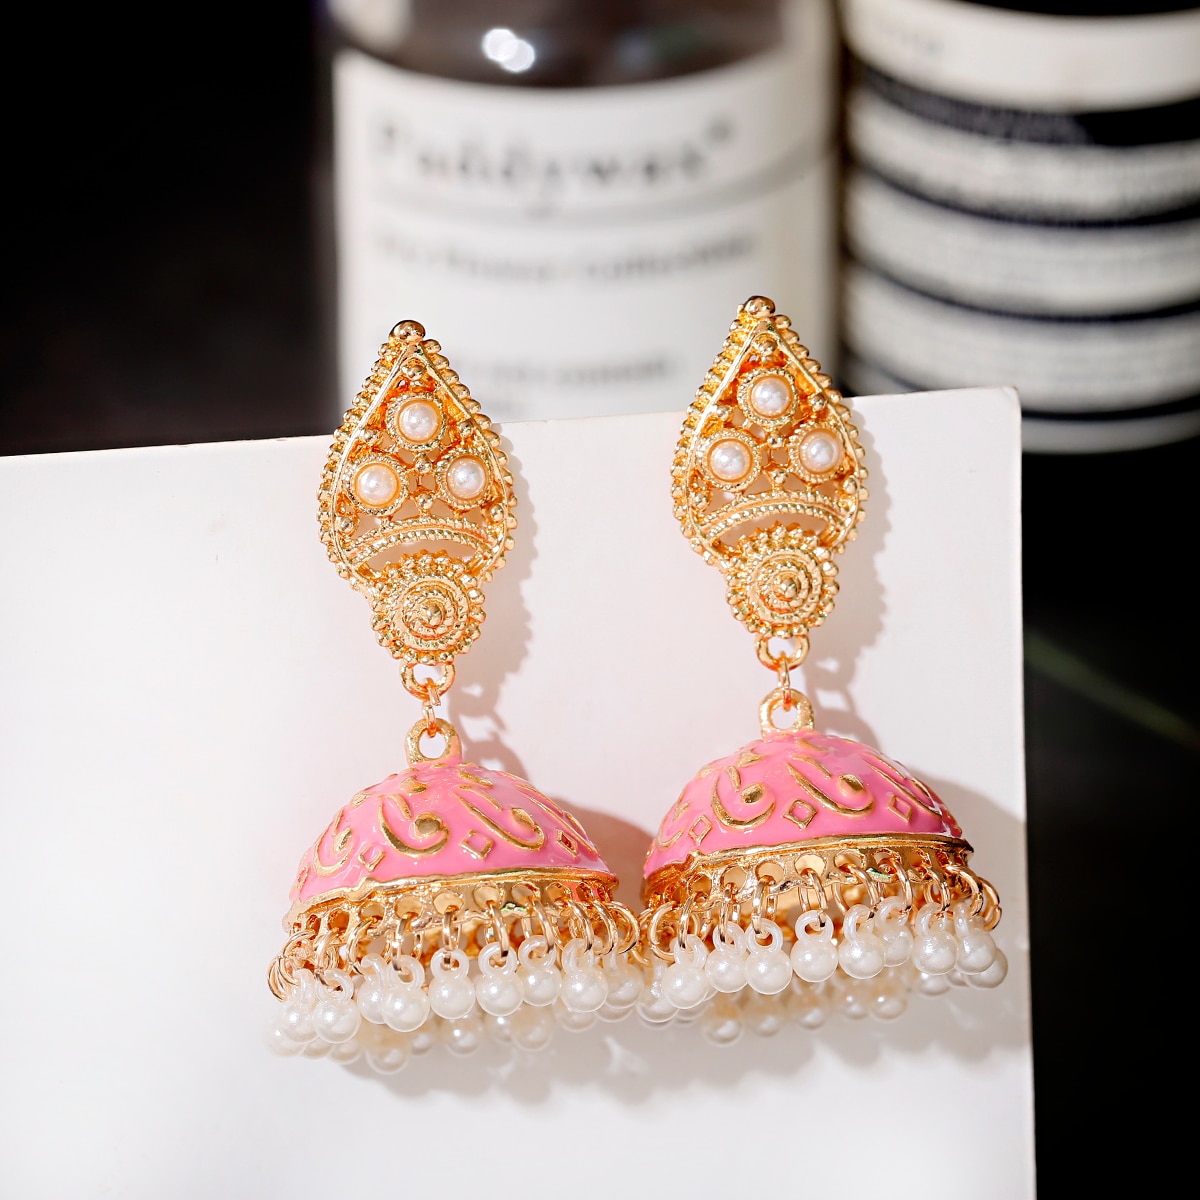 12-PairsLot-Boho-Afghan-Ethnic-Earrings-For-Women-Pendient-Pink-Gold-Silver-Color-Bell-Ladies-Indian-3256803995211369-7